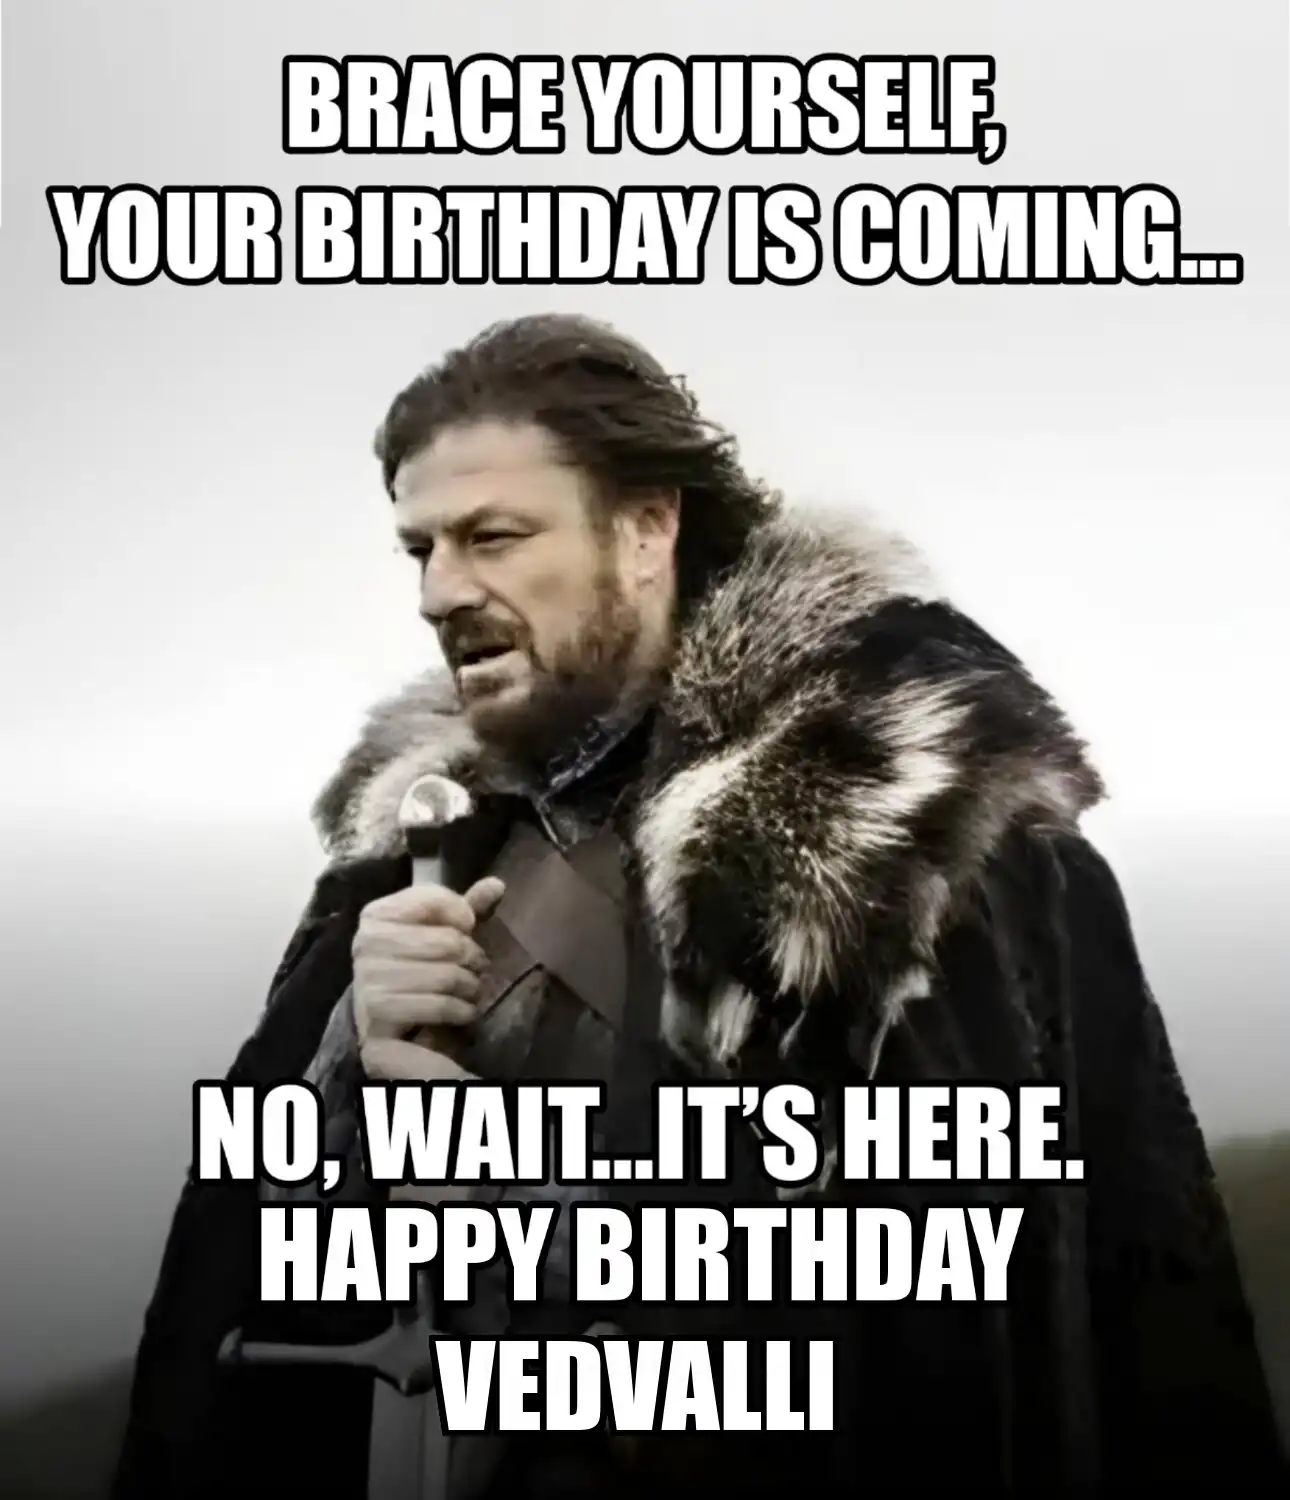 Happy Birthday Vedvalli Brace Yourself Your Birthday Is Coming Meme